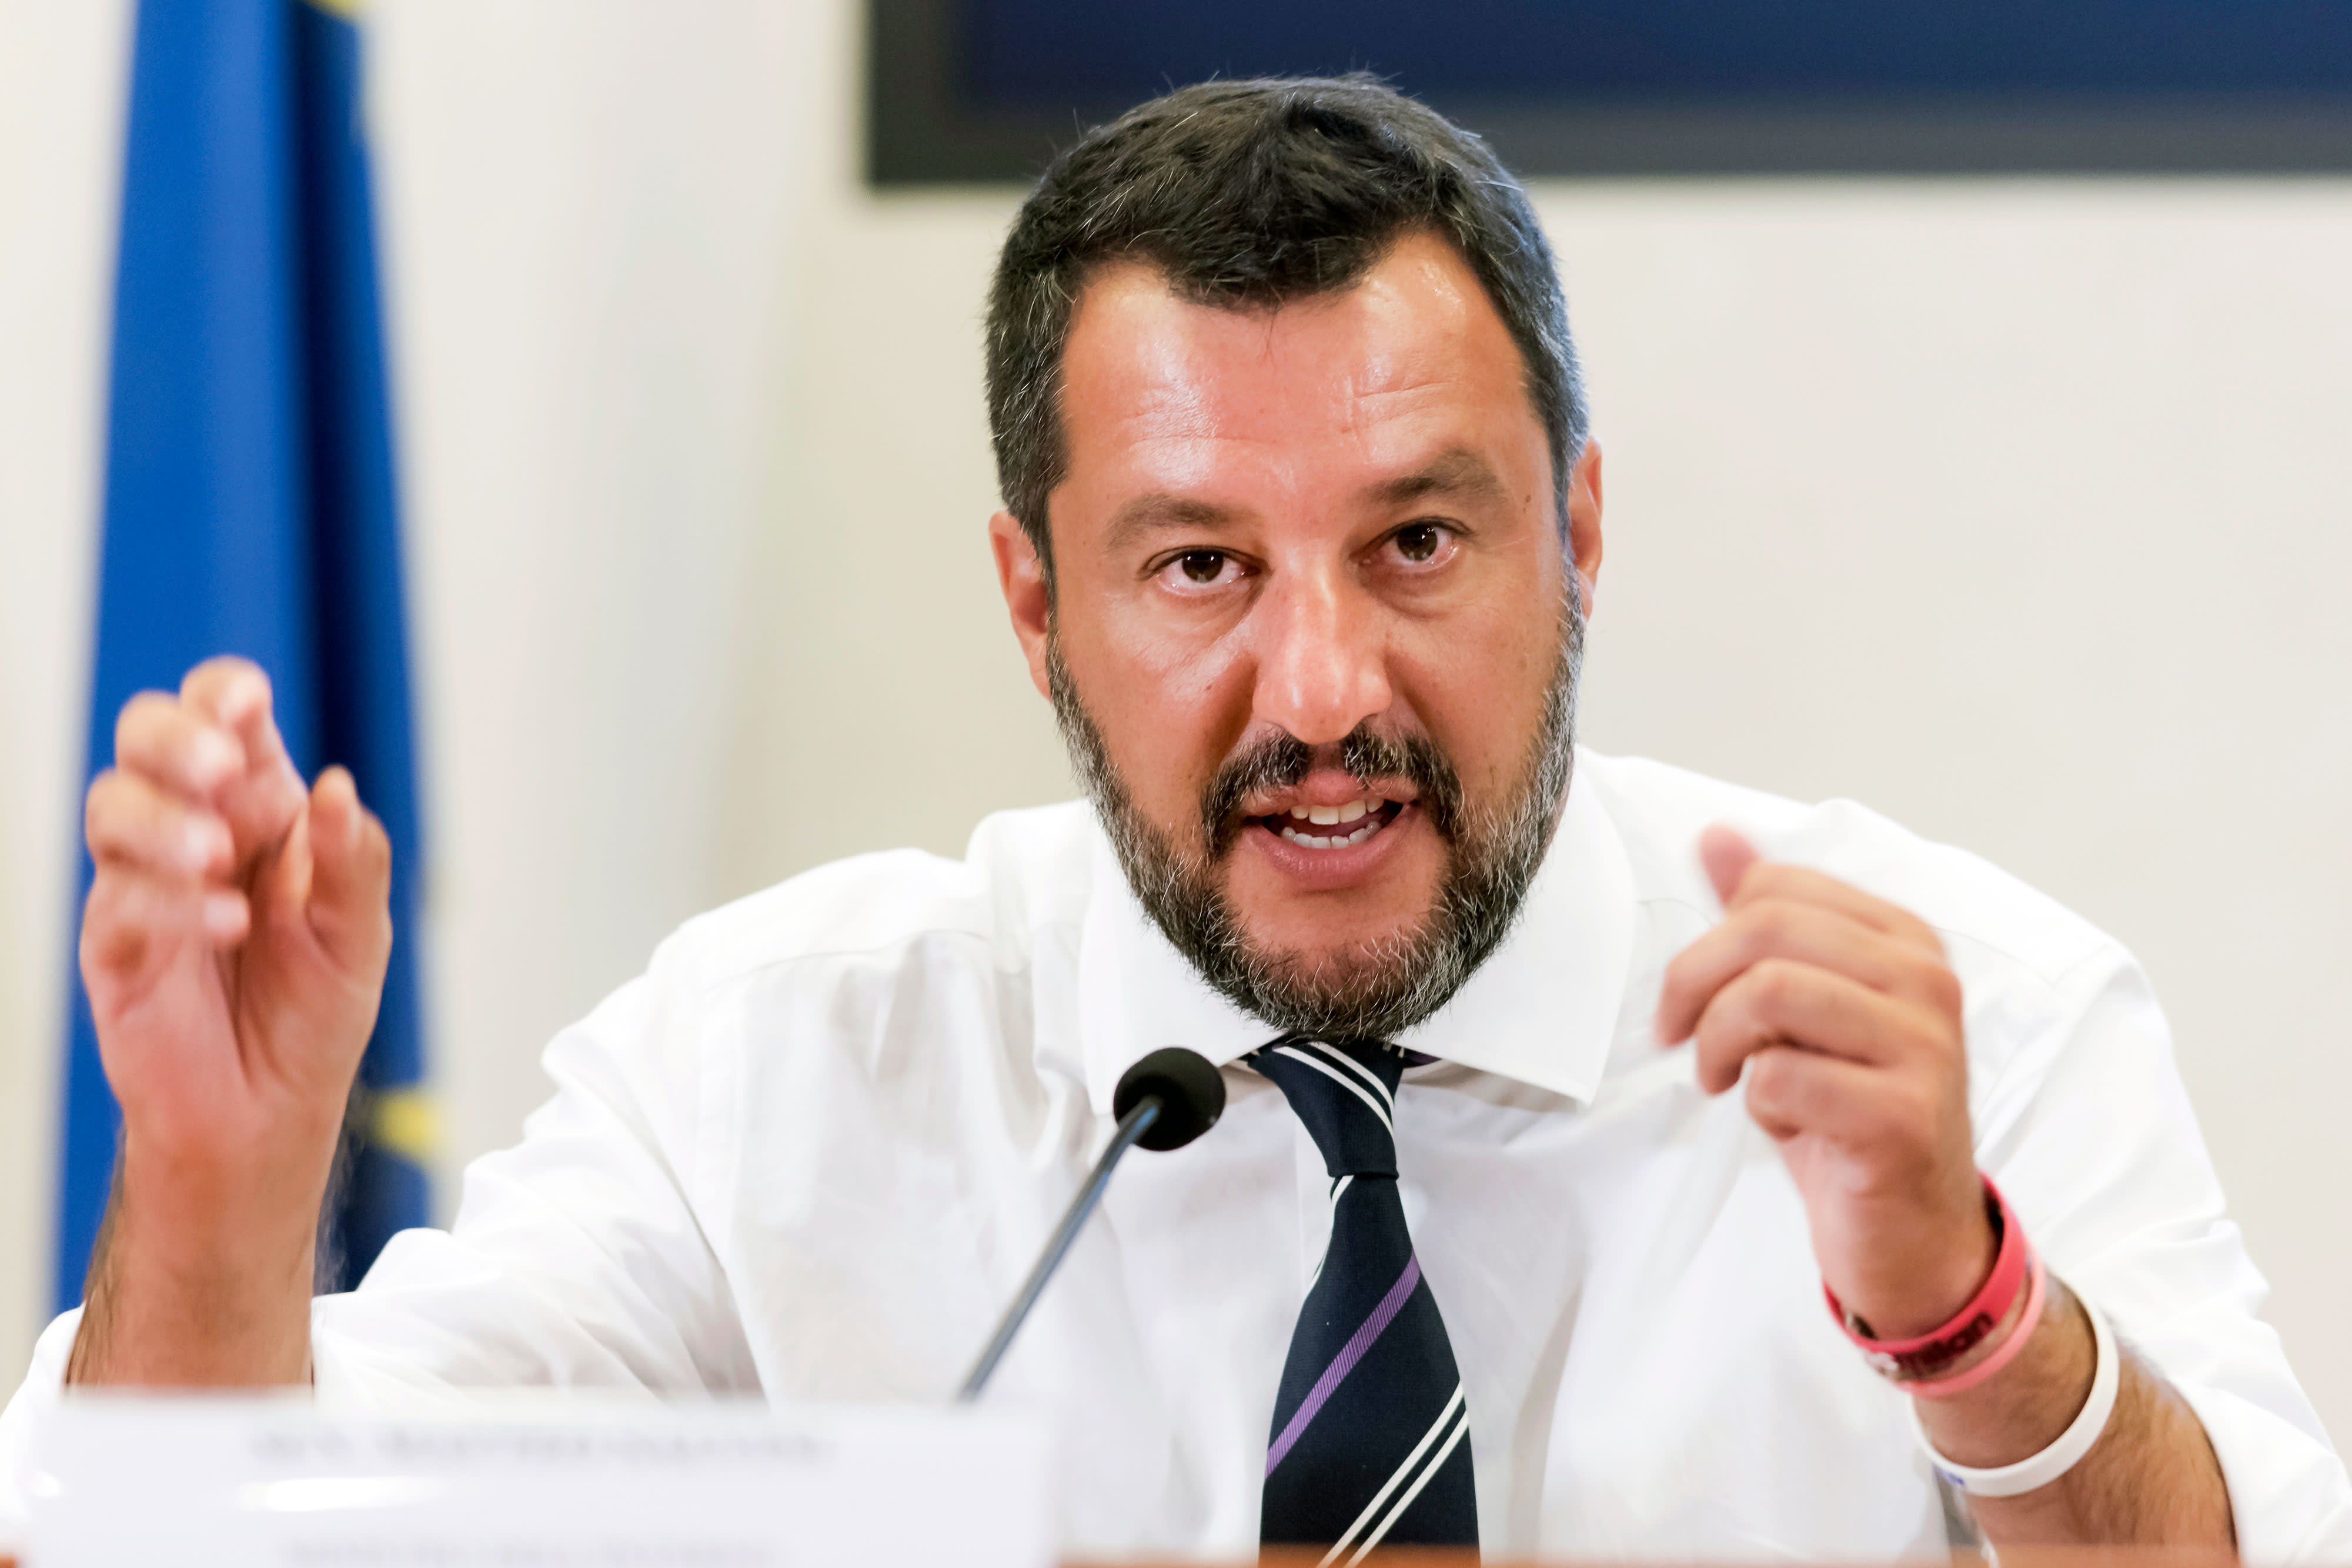 Italy should hold new elections, deputy prime minister Salvini says